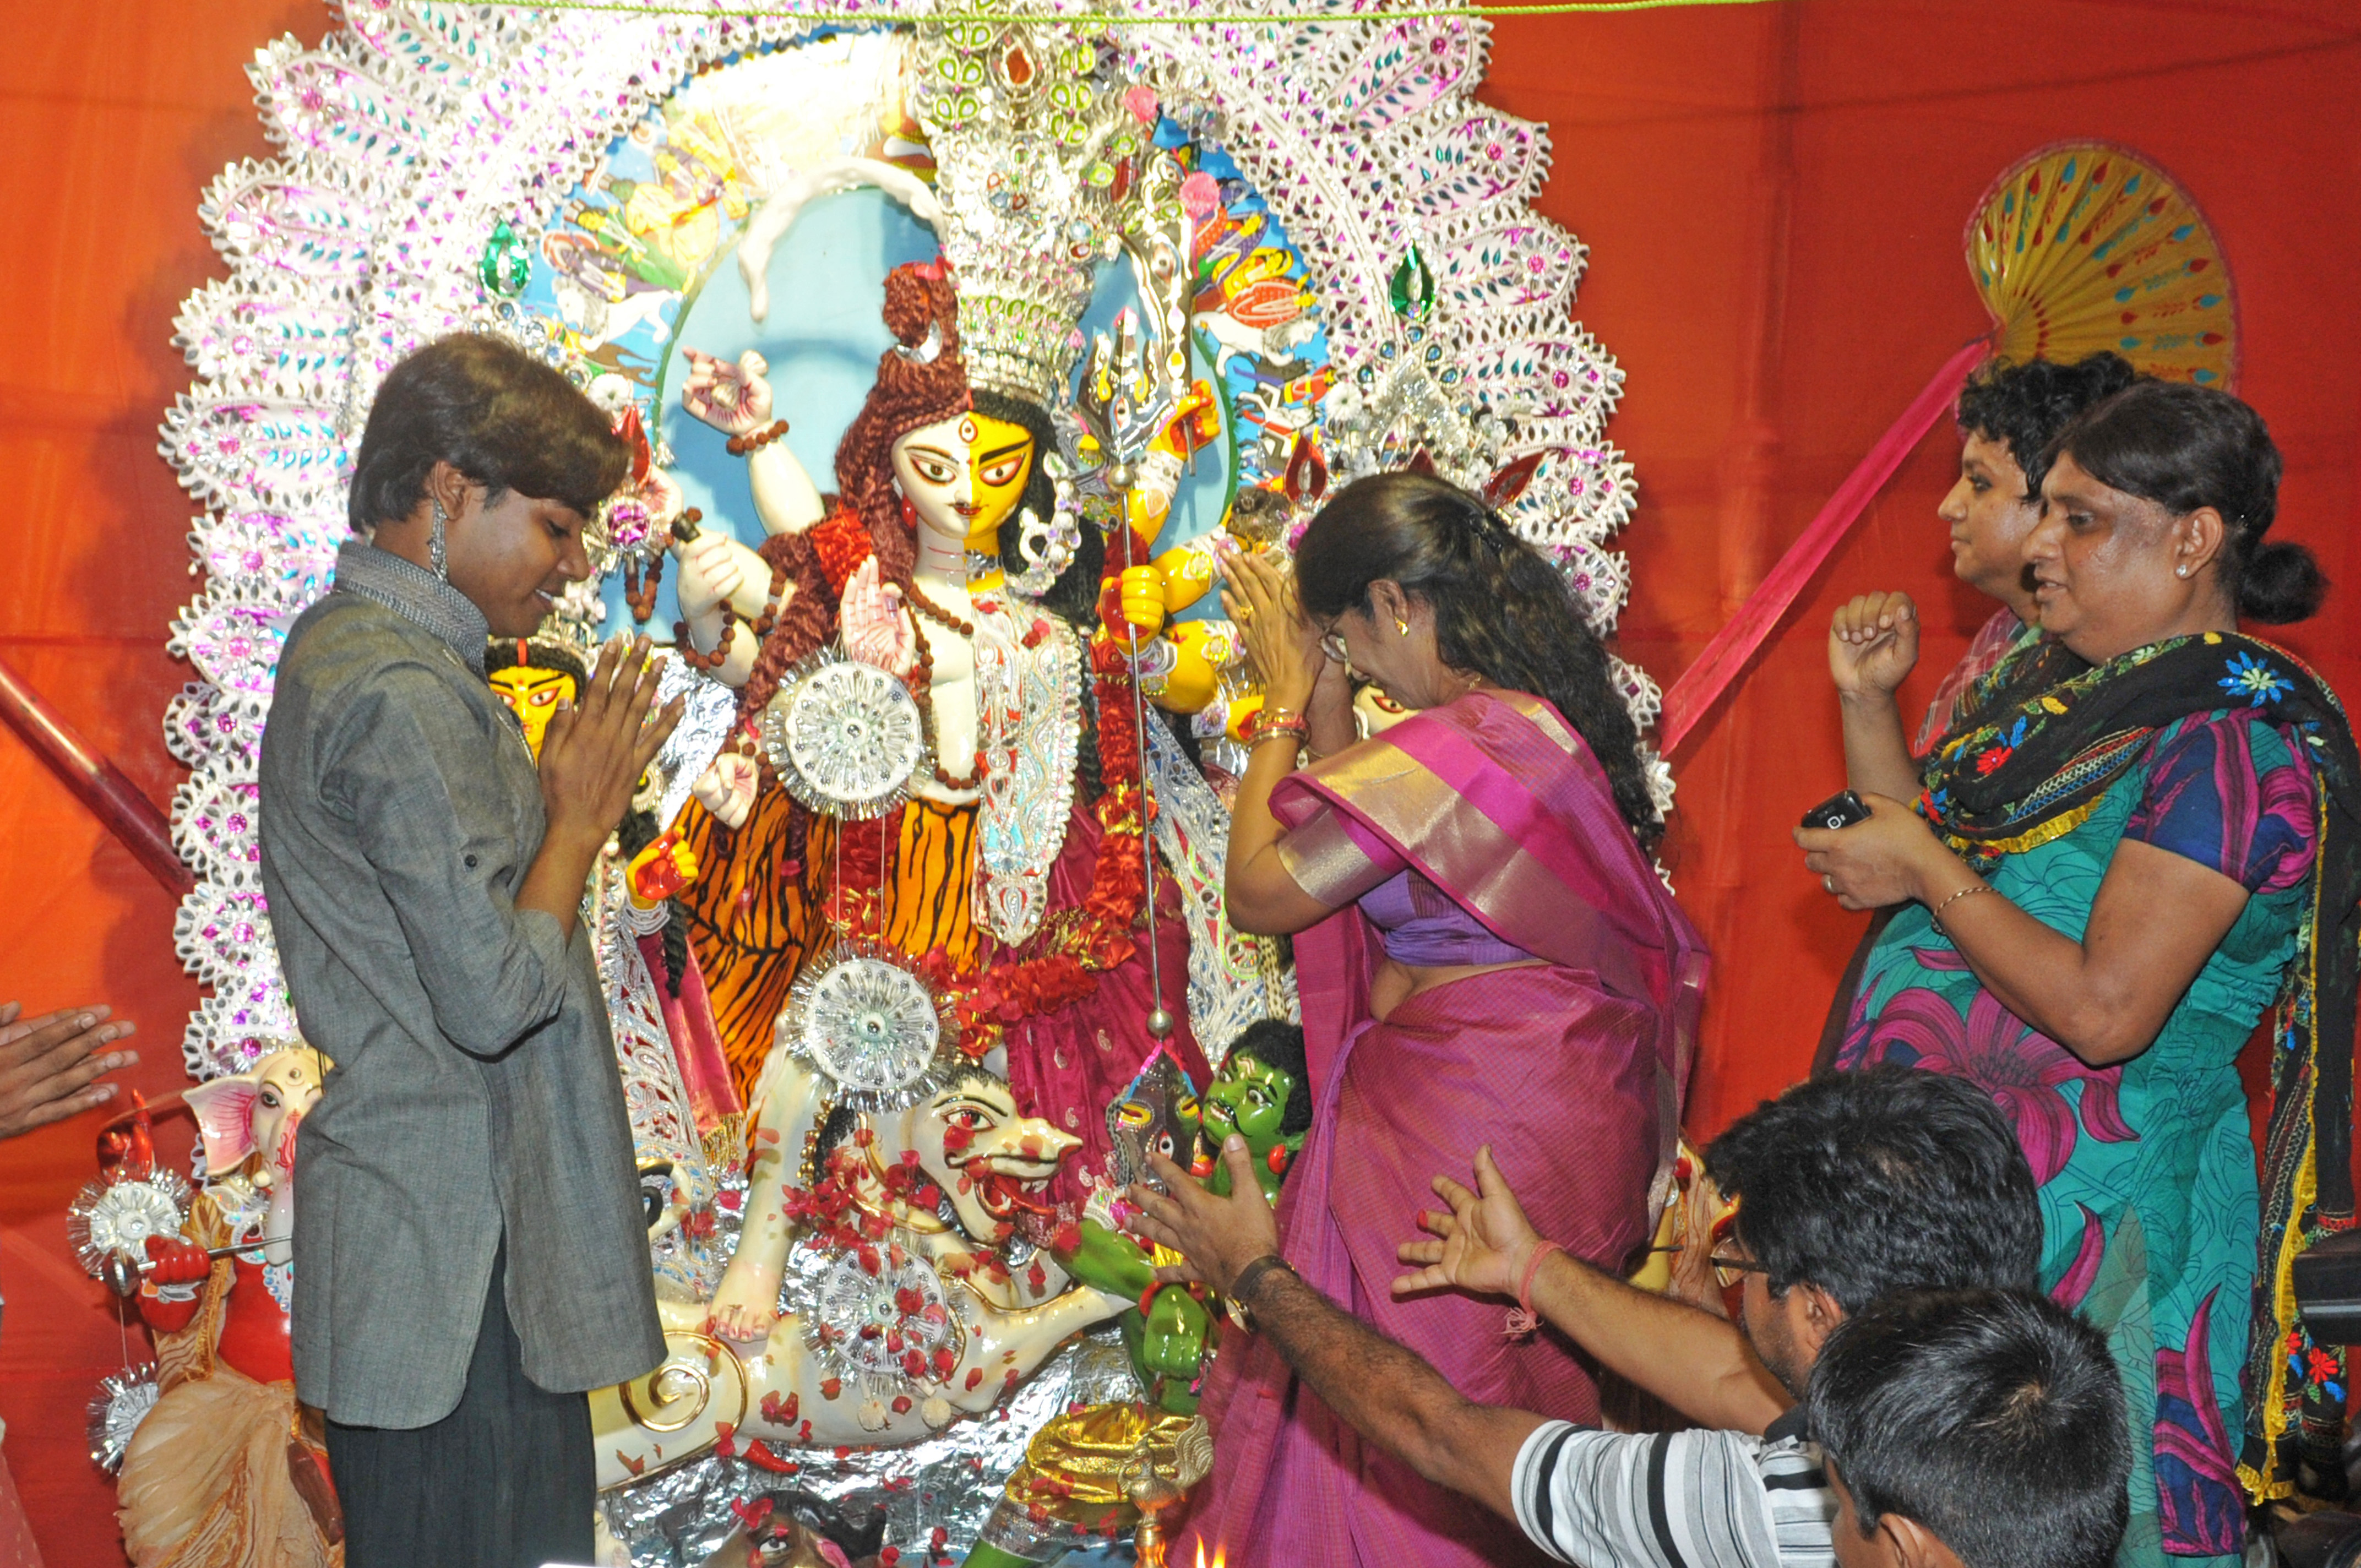 In Kolkata, to make their presence felt in the mainstream, the transgender community regularly organise events such as musical programmes, plays, film screenings, discussions on the transgender experience, and even special Durga puja celebrations